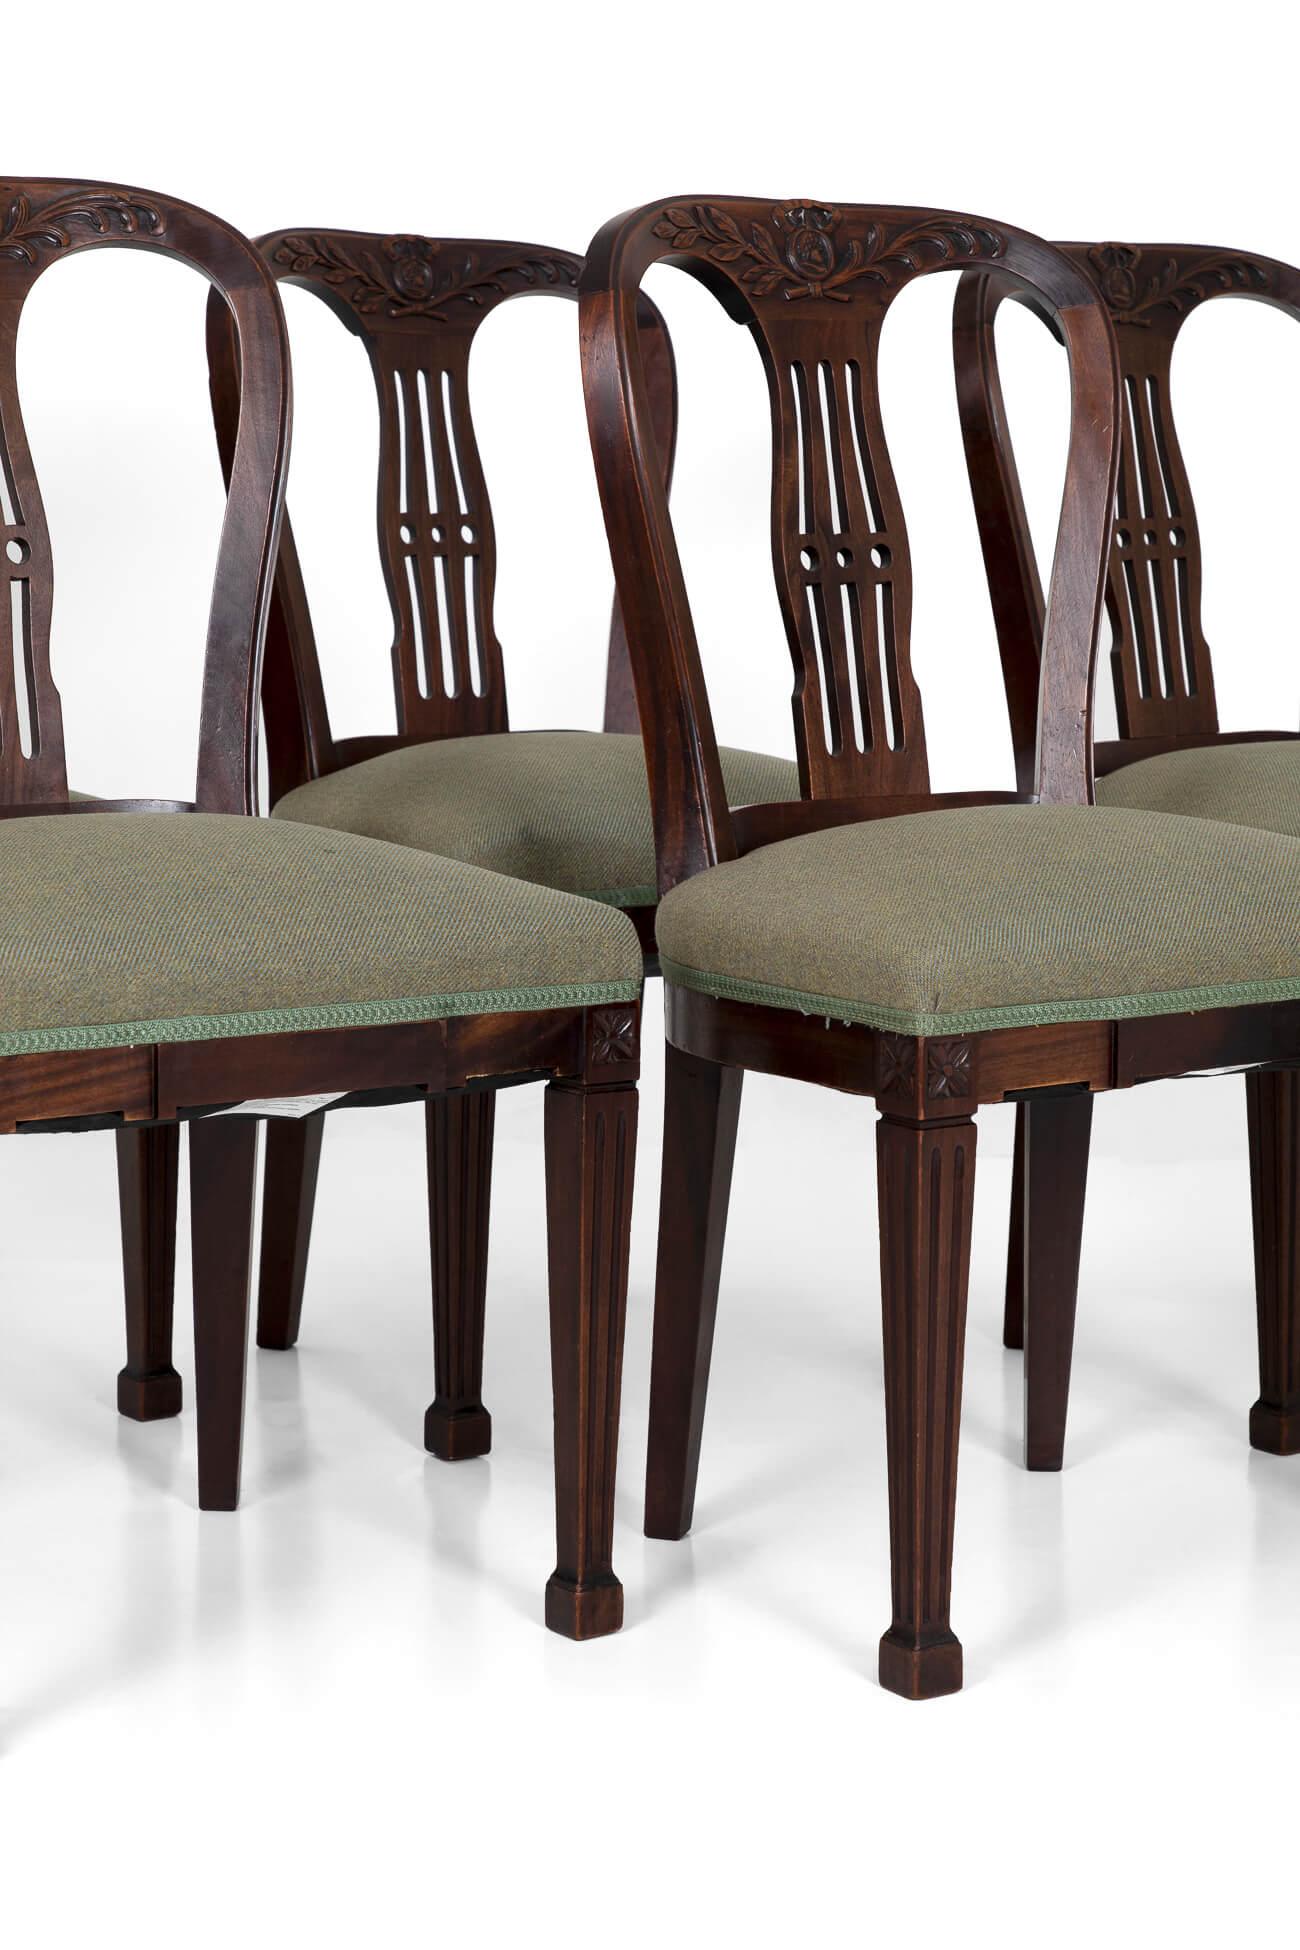 Organic Material Set of 19th Century Mahogany Victorian Dining Chairs, circa 1860 For Sale